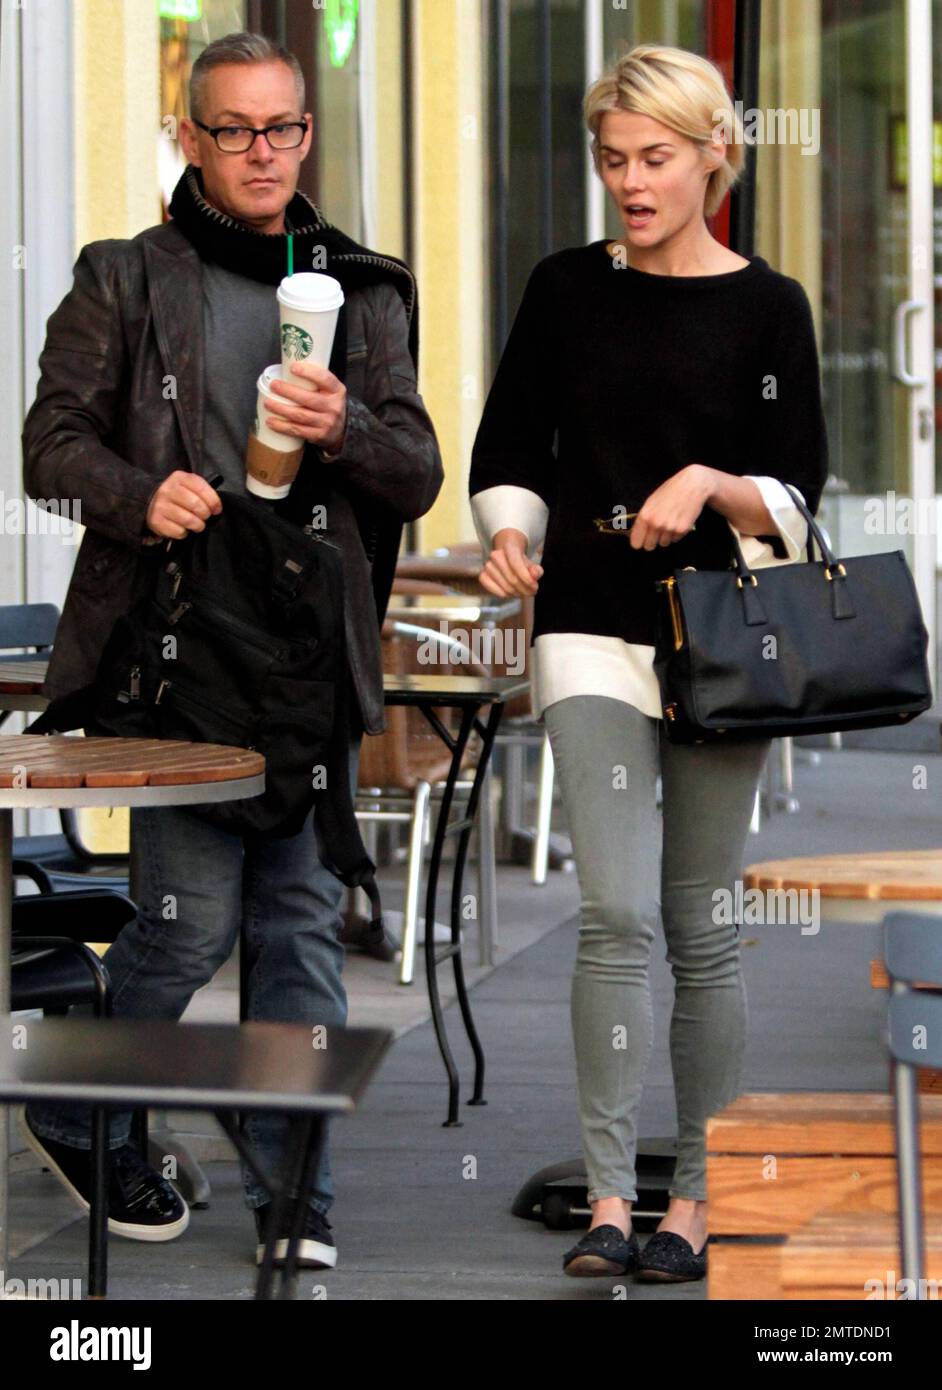 EXCLUSIVE!! Australian actress and model Rachael Taylor was spotted getting  some coffee with a male friend in West Hollywood. The 27 year old was seen  wearing a black tunic top with grey